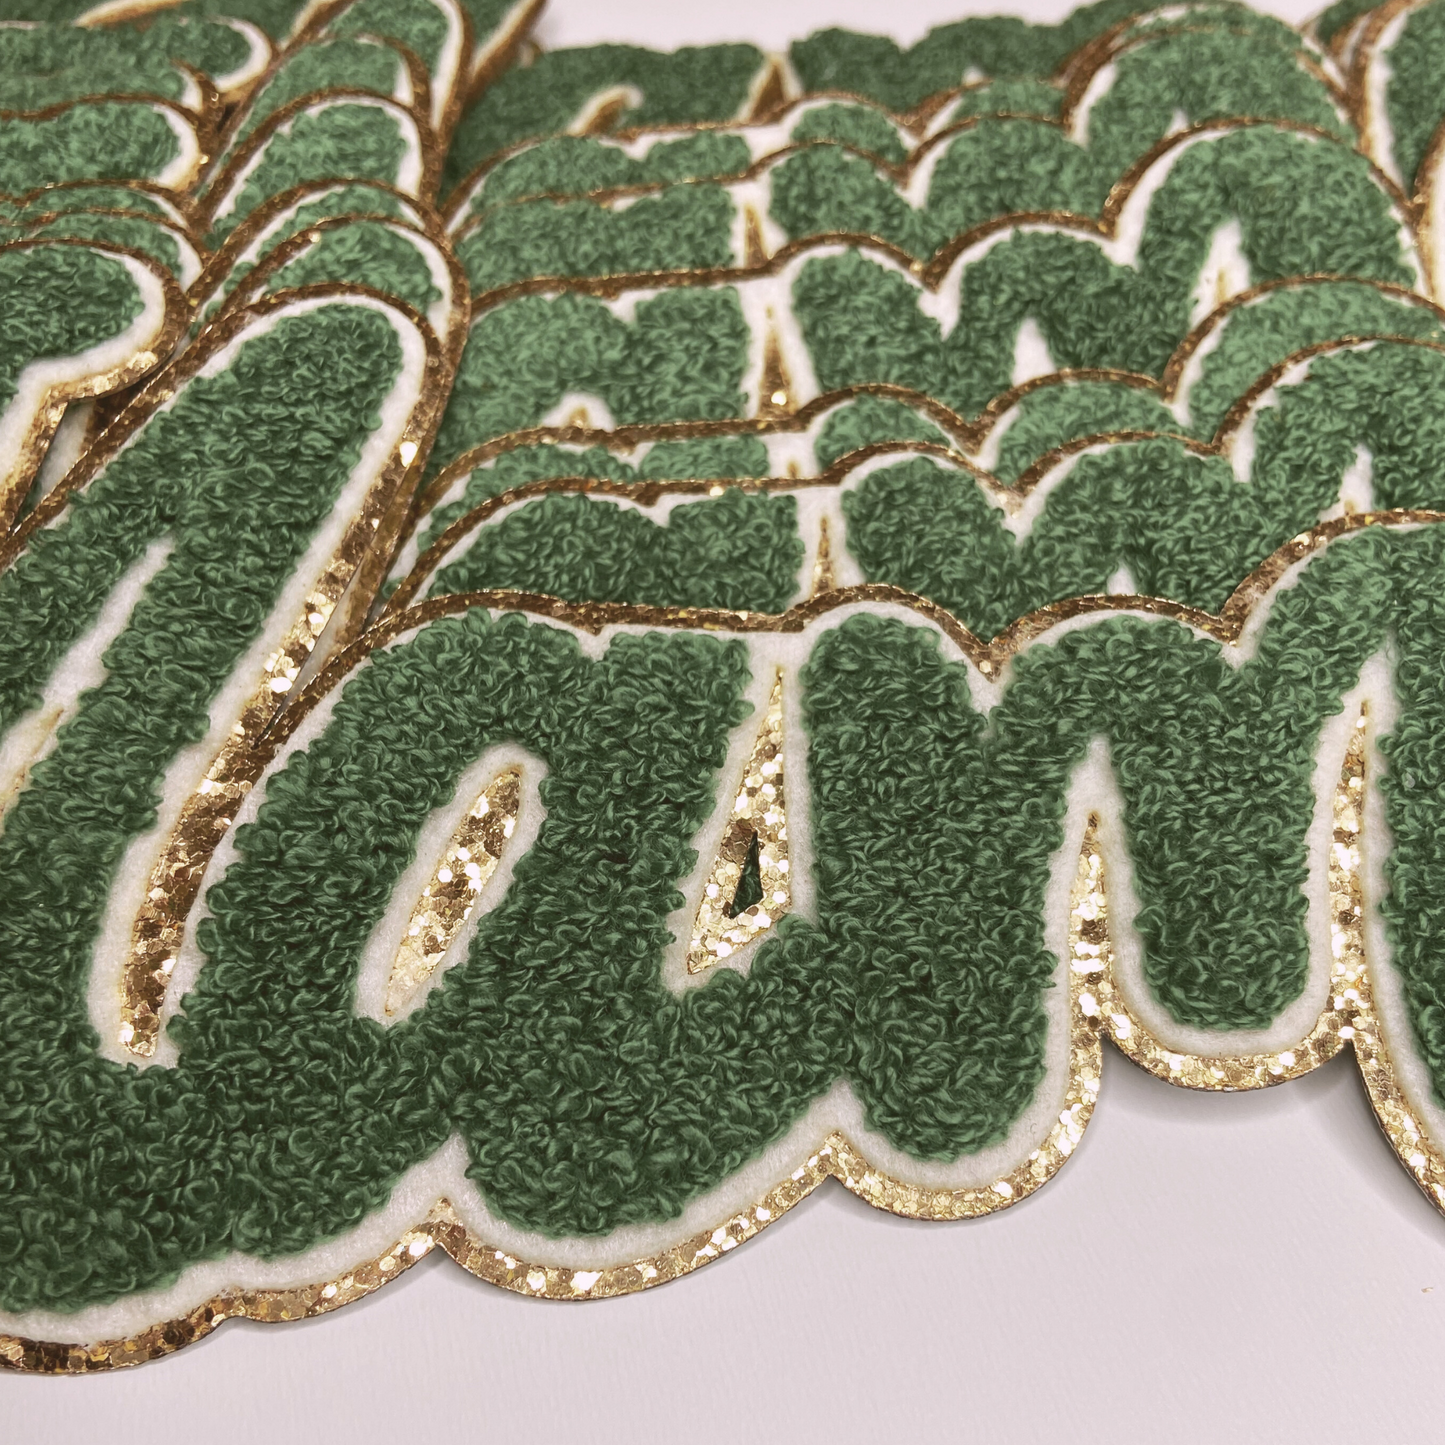 11" MAMA in Military Green - Chenille Patch